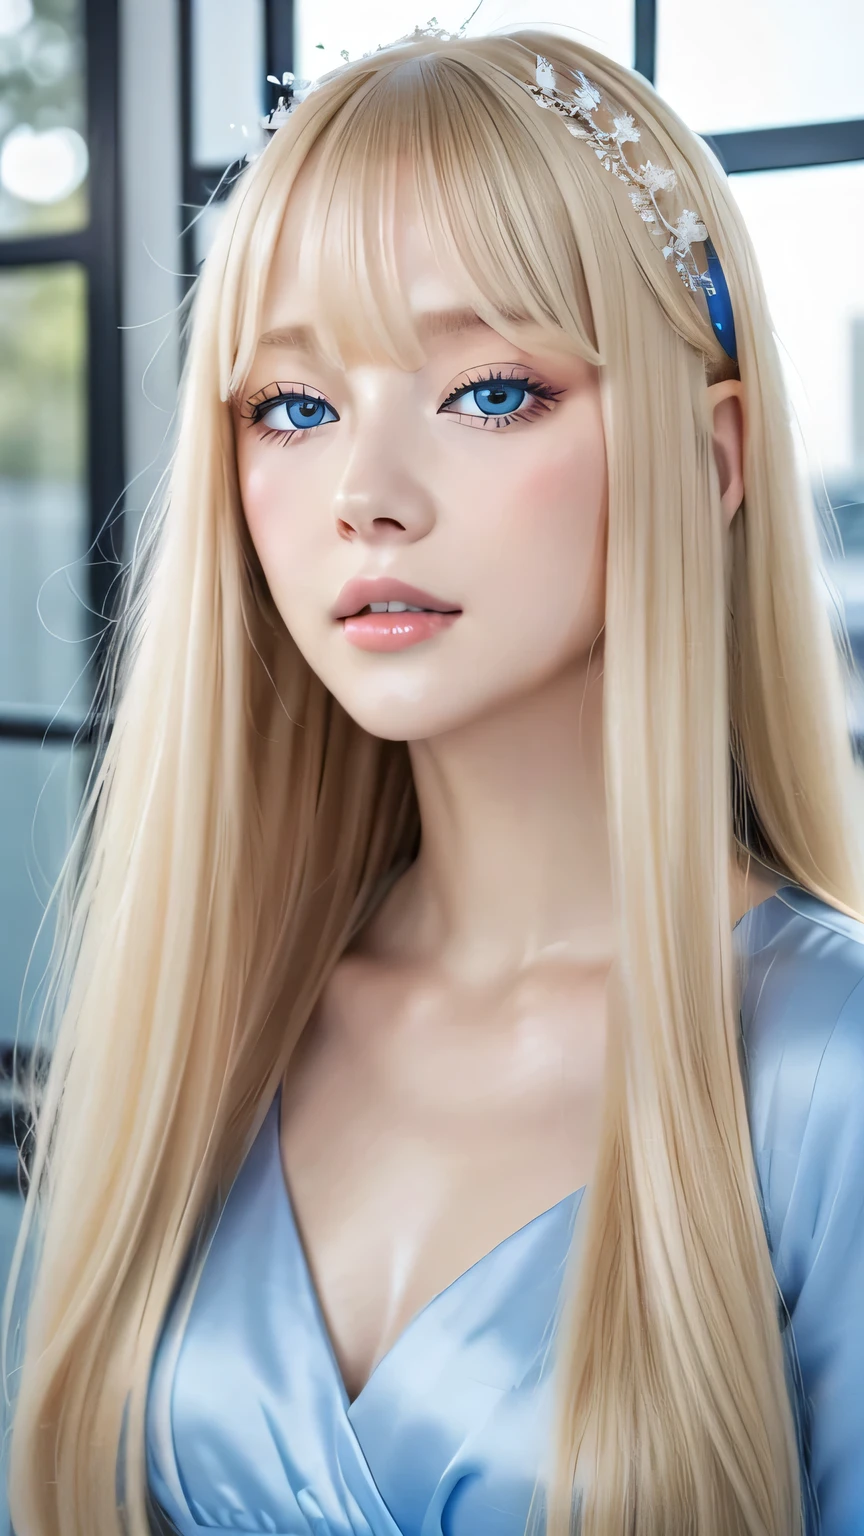 Silky super long natural platinum blonde hair、Bangs between the eyes、Bangs that hang over the face、A beautiful sexy girl with a very cute face、Beautiful, clear, bright blue eyes、White Princess Dresses、Small Face Girl、Round face、Cheek gloss highlighter、Very white shiny skin、